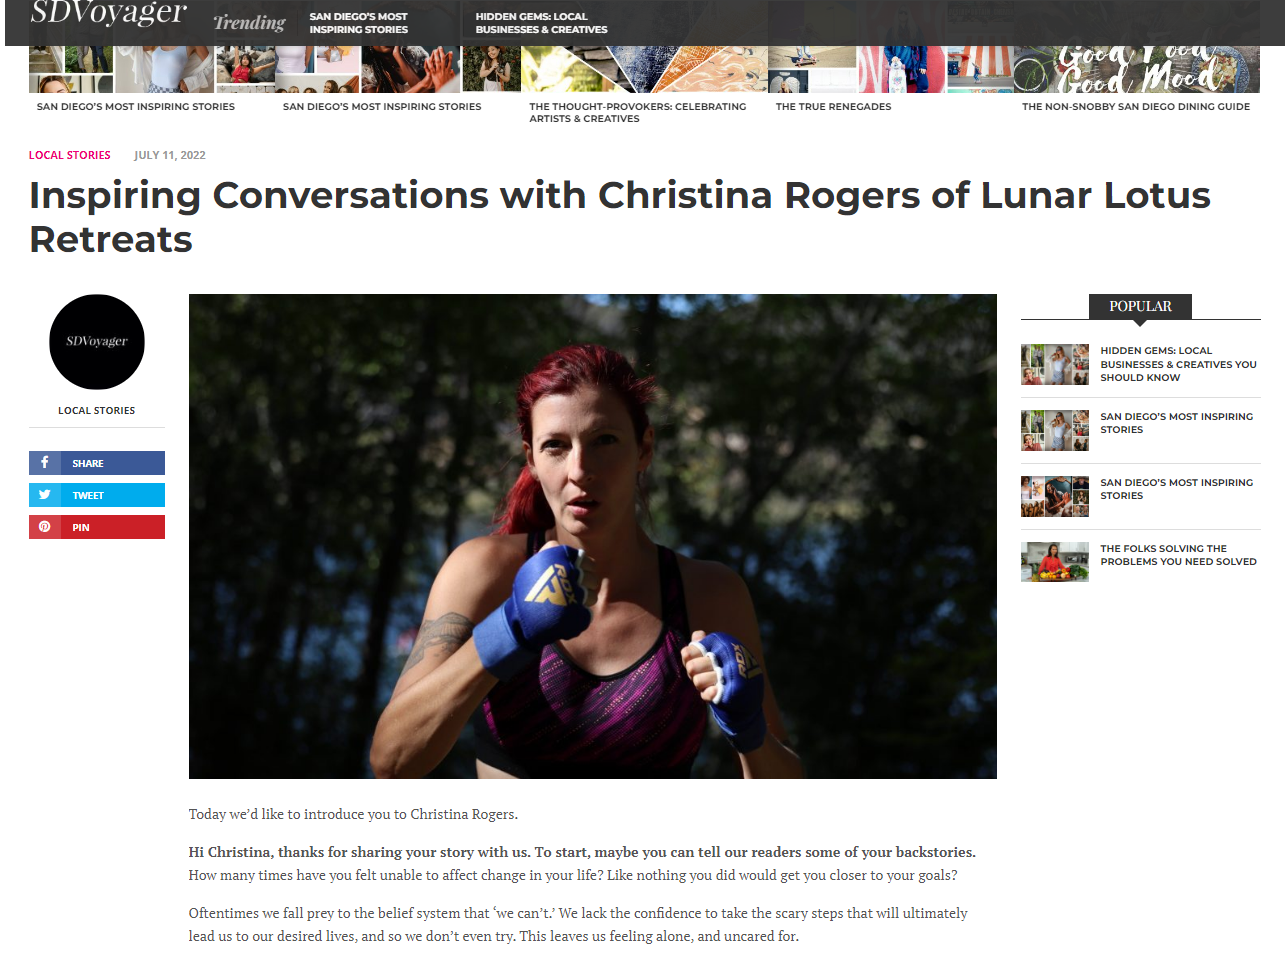 SD Voyager Interview of Christina Rogers of Lunar Lotus Retreats